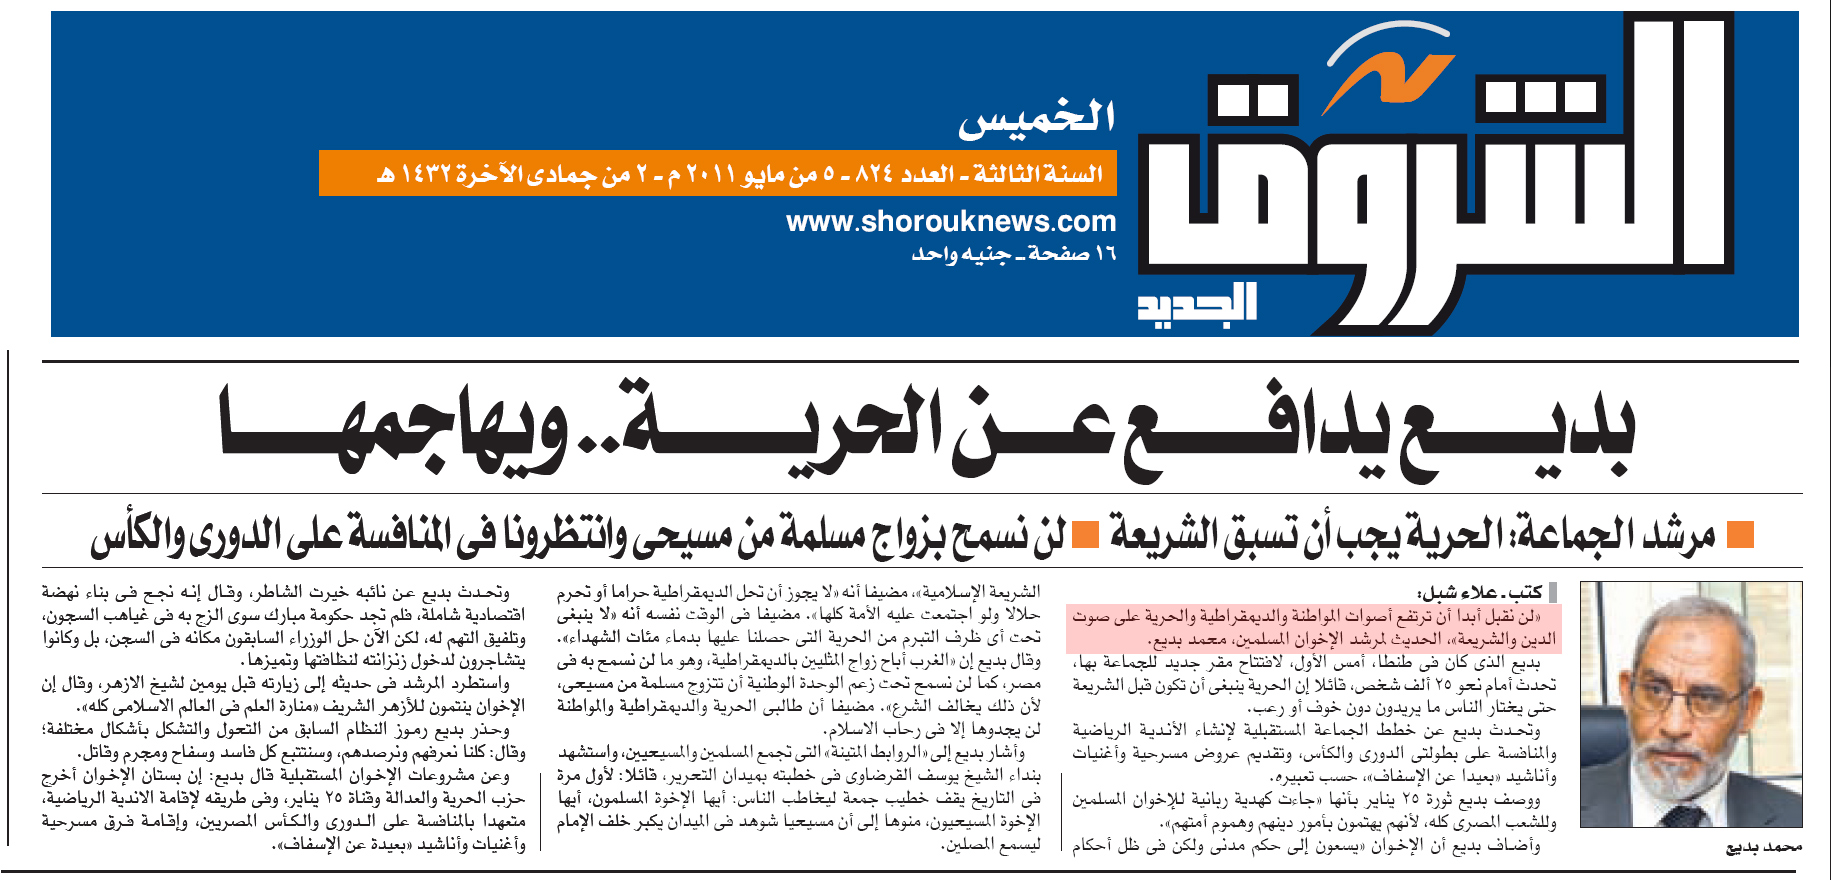 Brotherhood vows sharia law in Egypt as reported on page 5 of the Egyptian daily AShorouq, May 5, 2011.